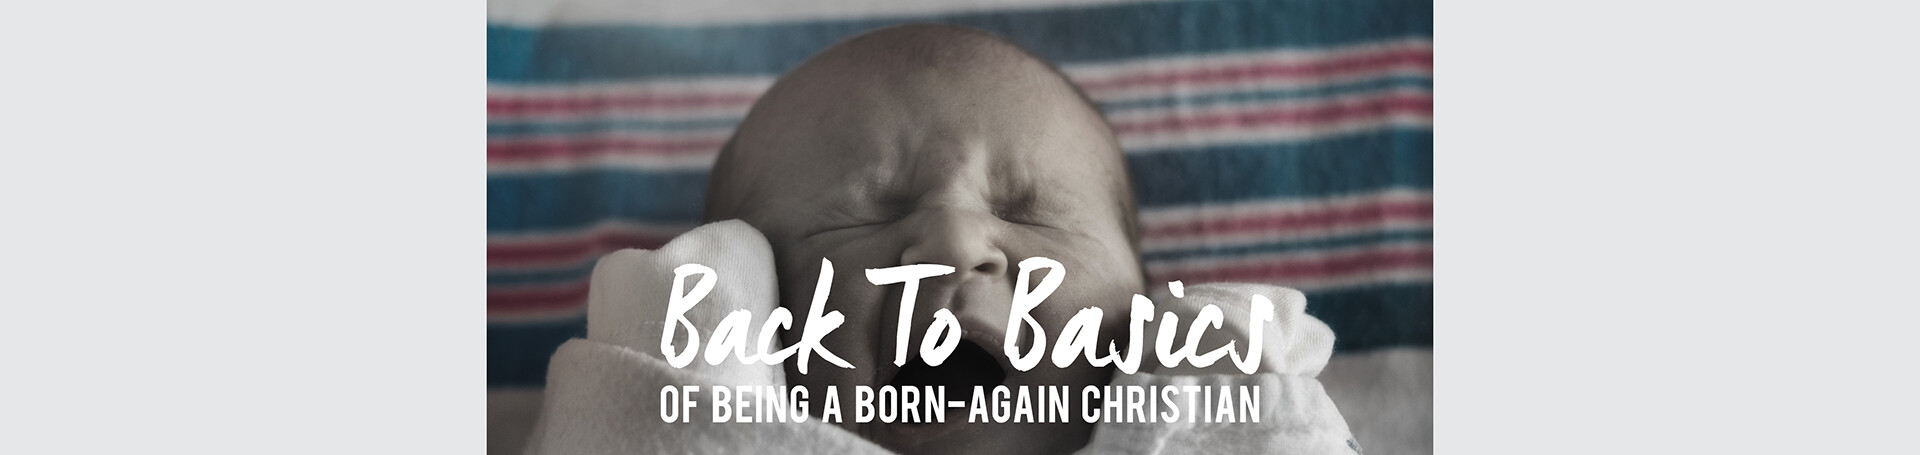 Back To Basics of Being A Born-Again Christian